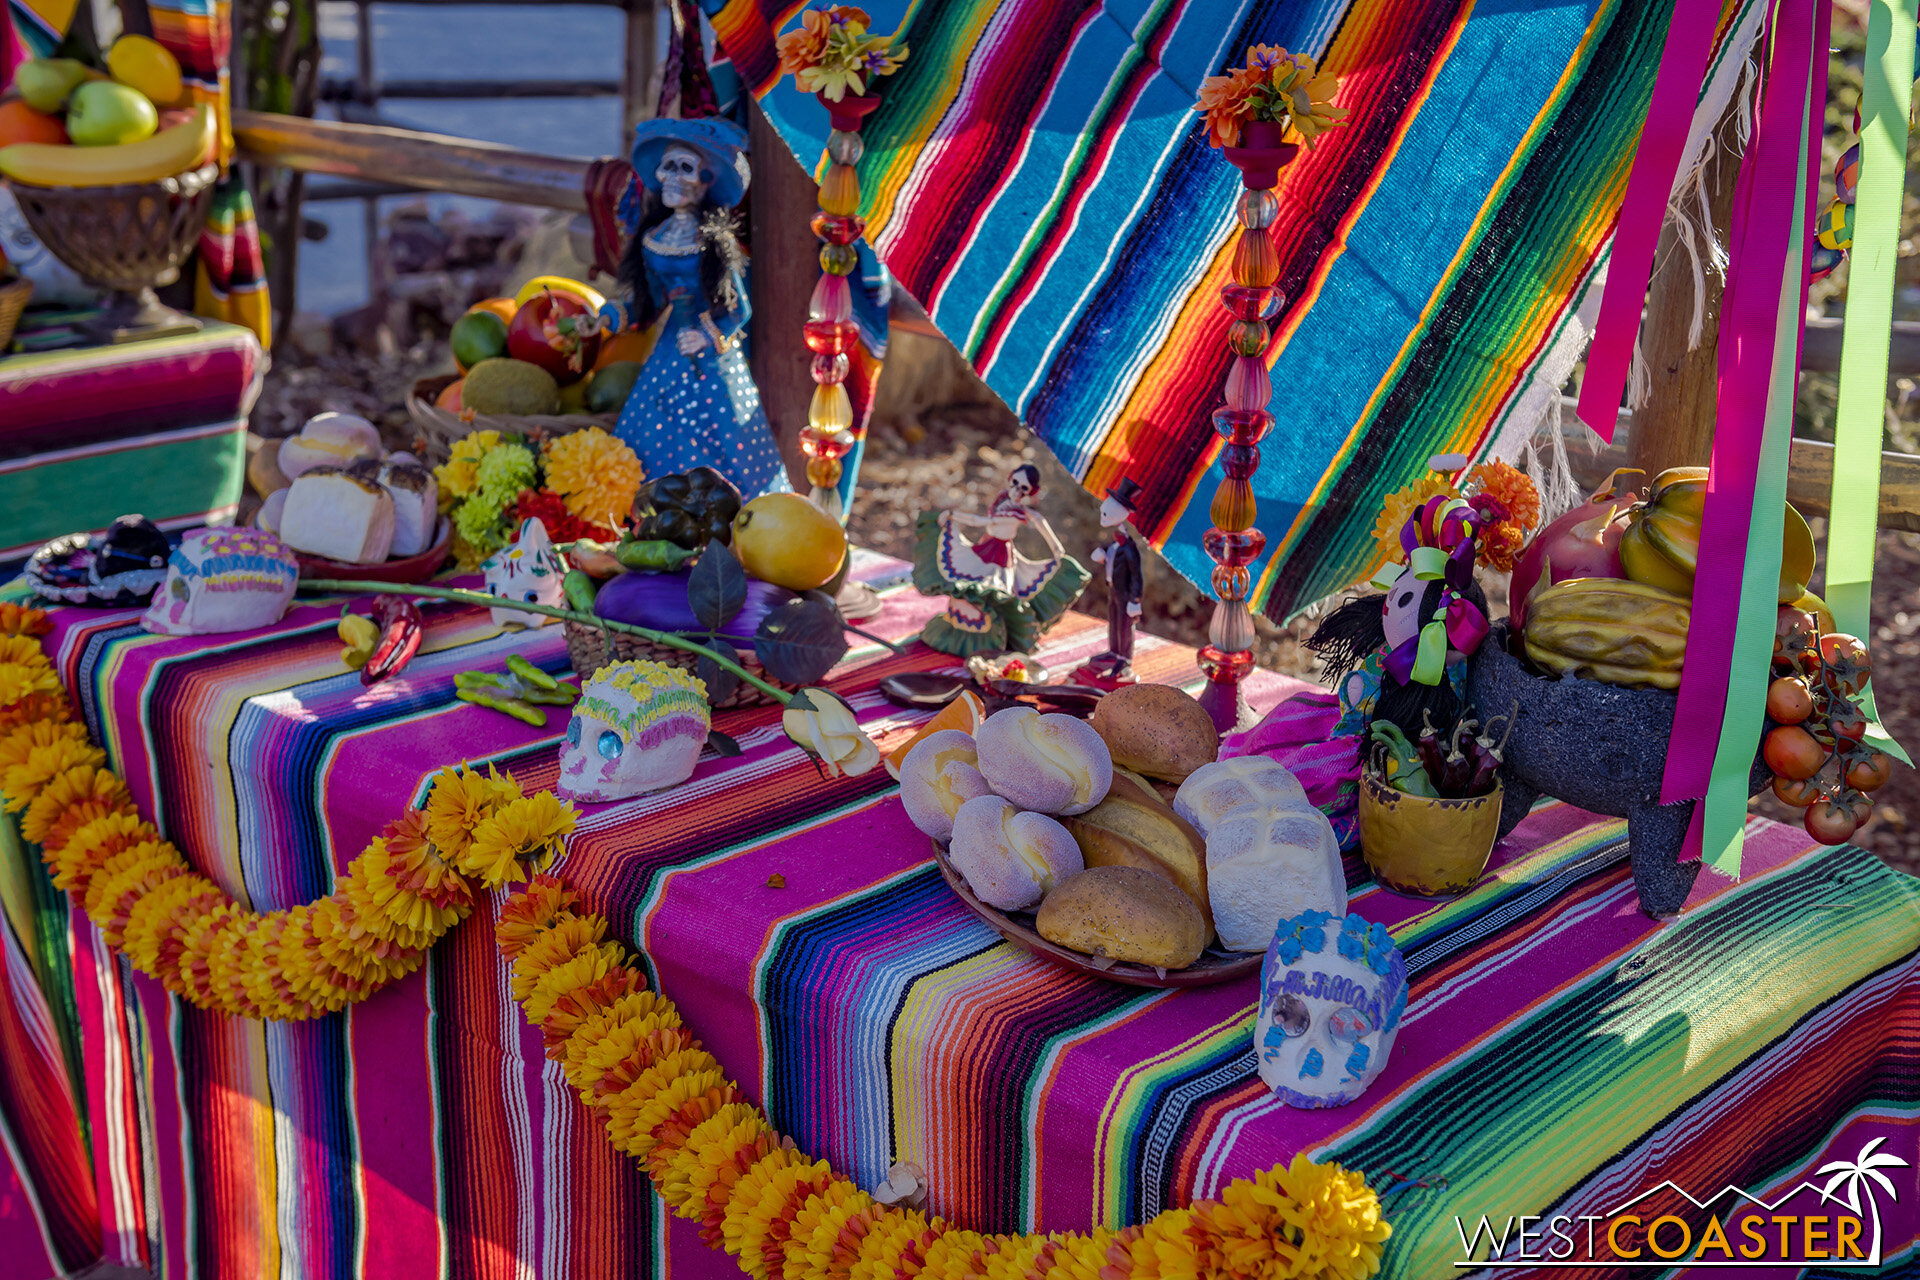  Of course, there is an ofrenda, or offering display for the dead. 